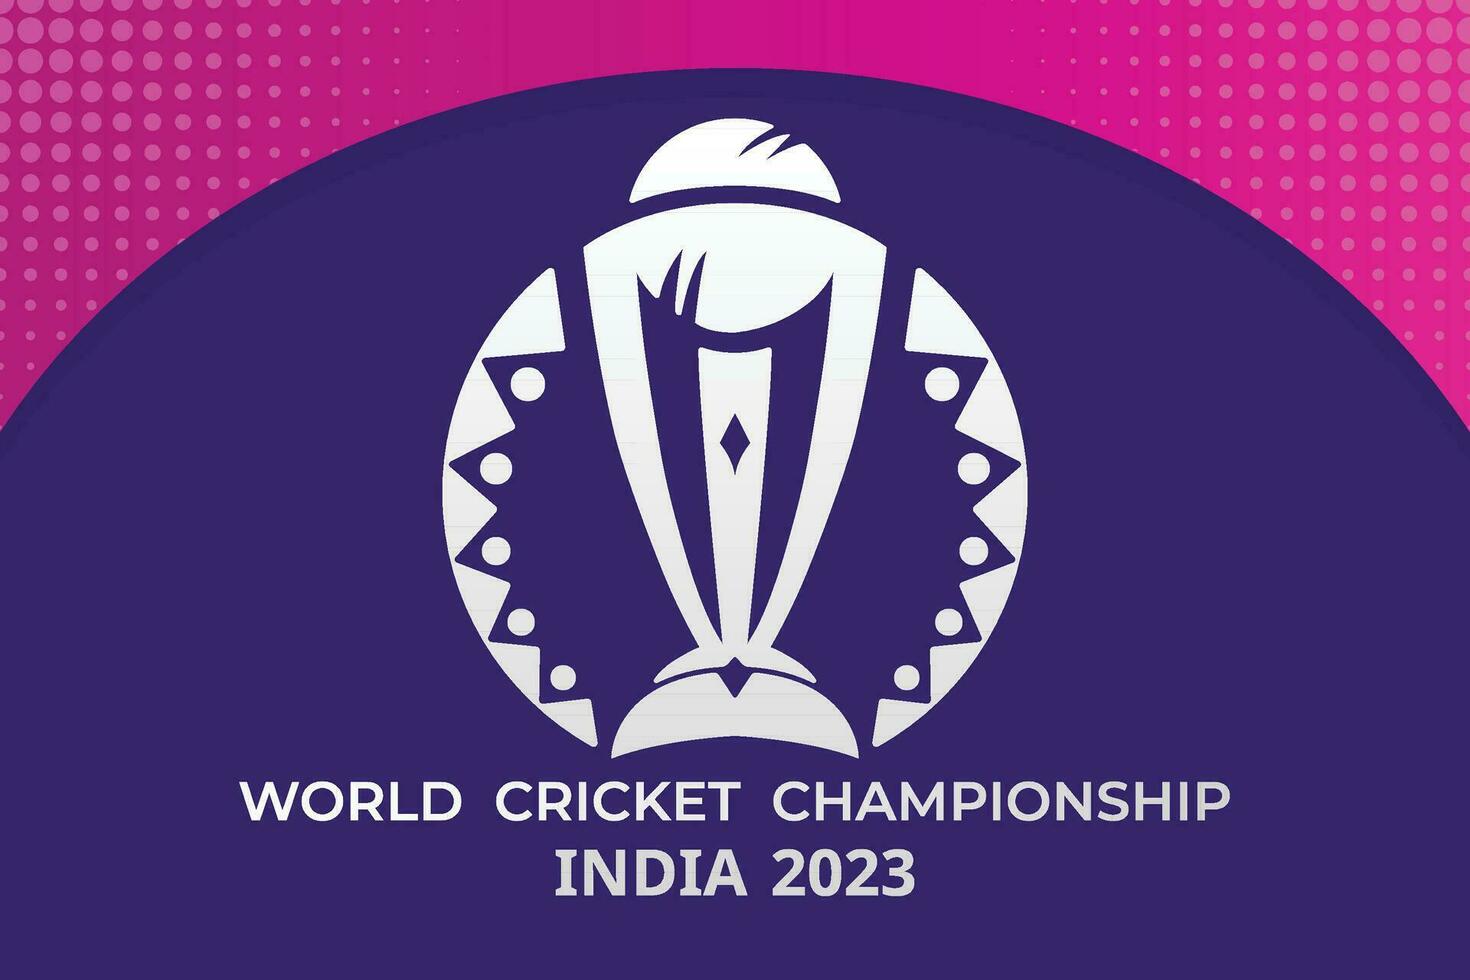 World Cup Cricket Championship 2023 Intro Template vector